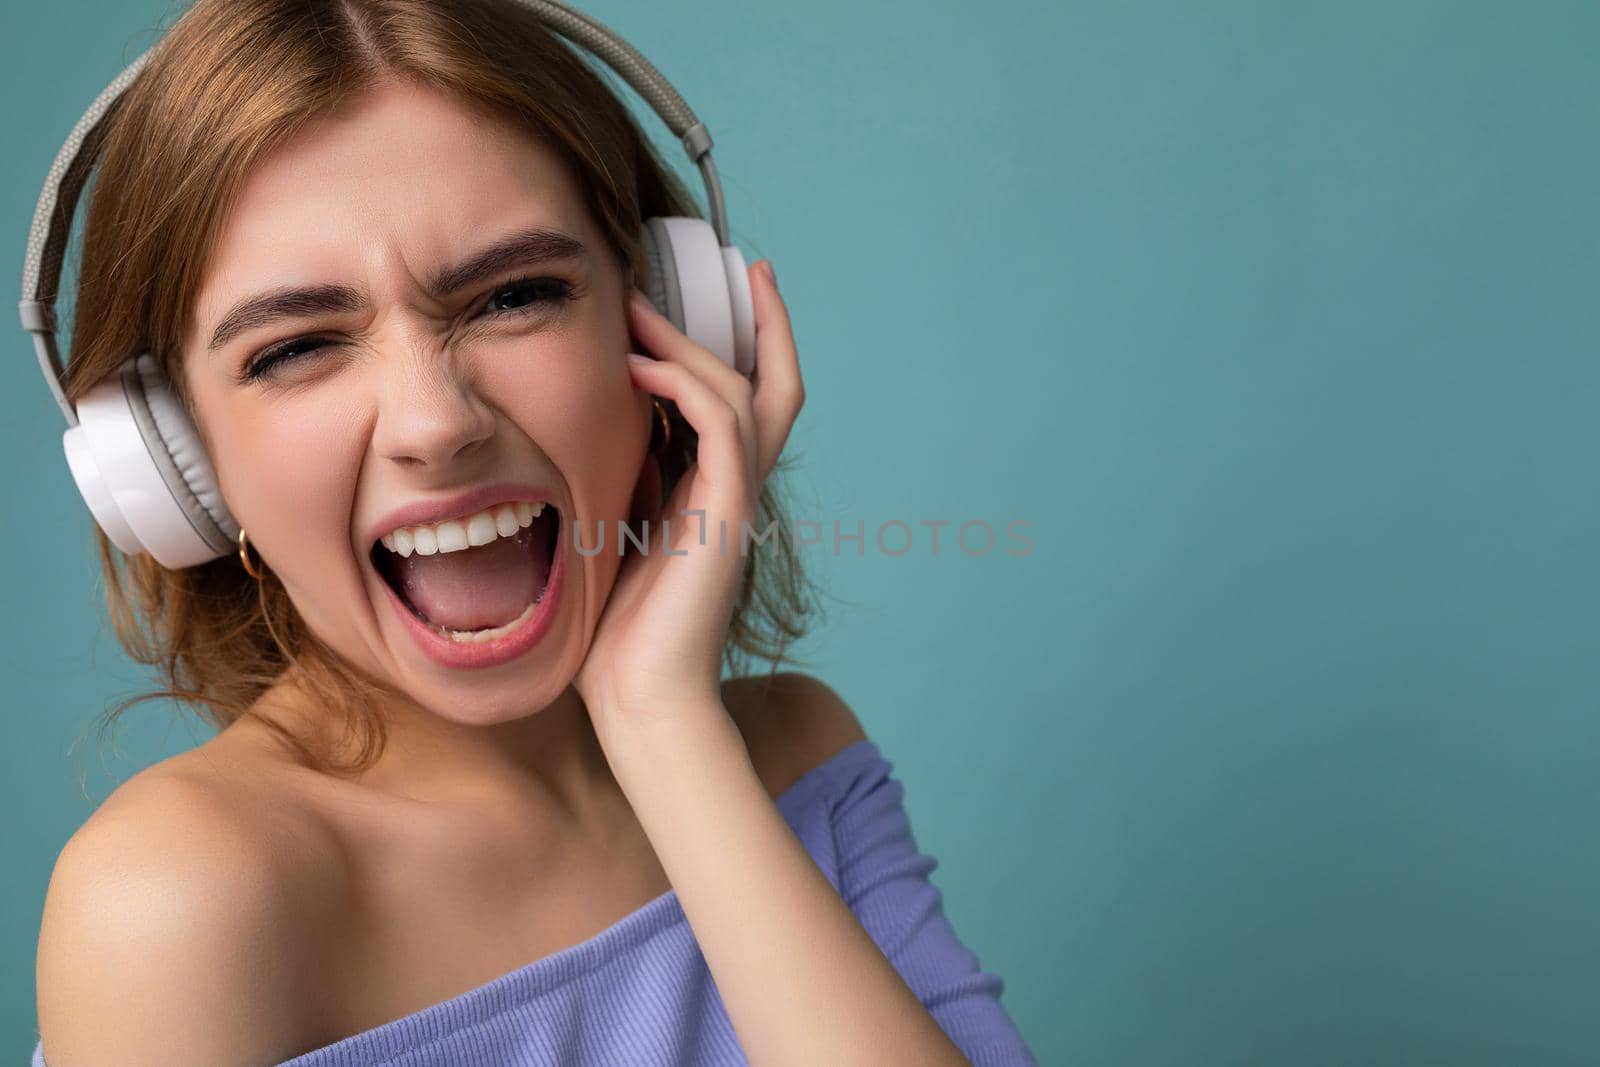 Closeup portrait of attractive emotional young blonde woman wearing blue crop top isolated on blue background wearing white wireless bluetooth headphones listening to cool music and having fun looking at camera.